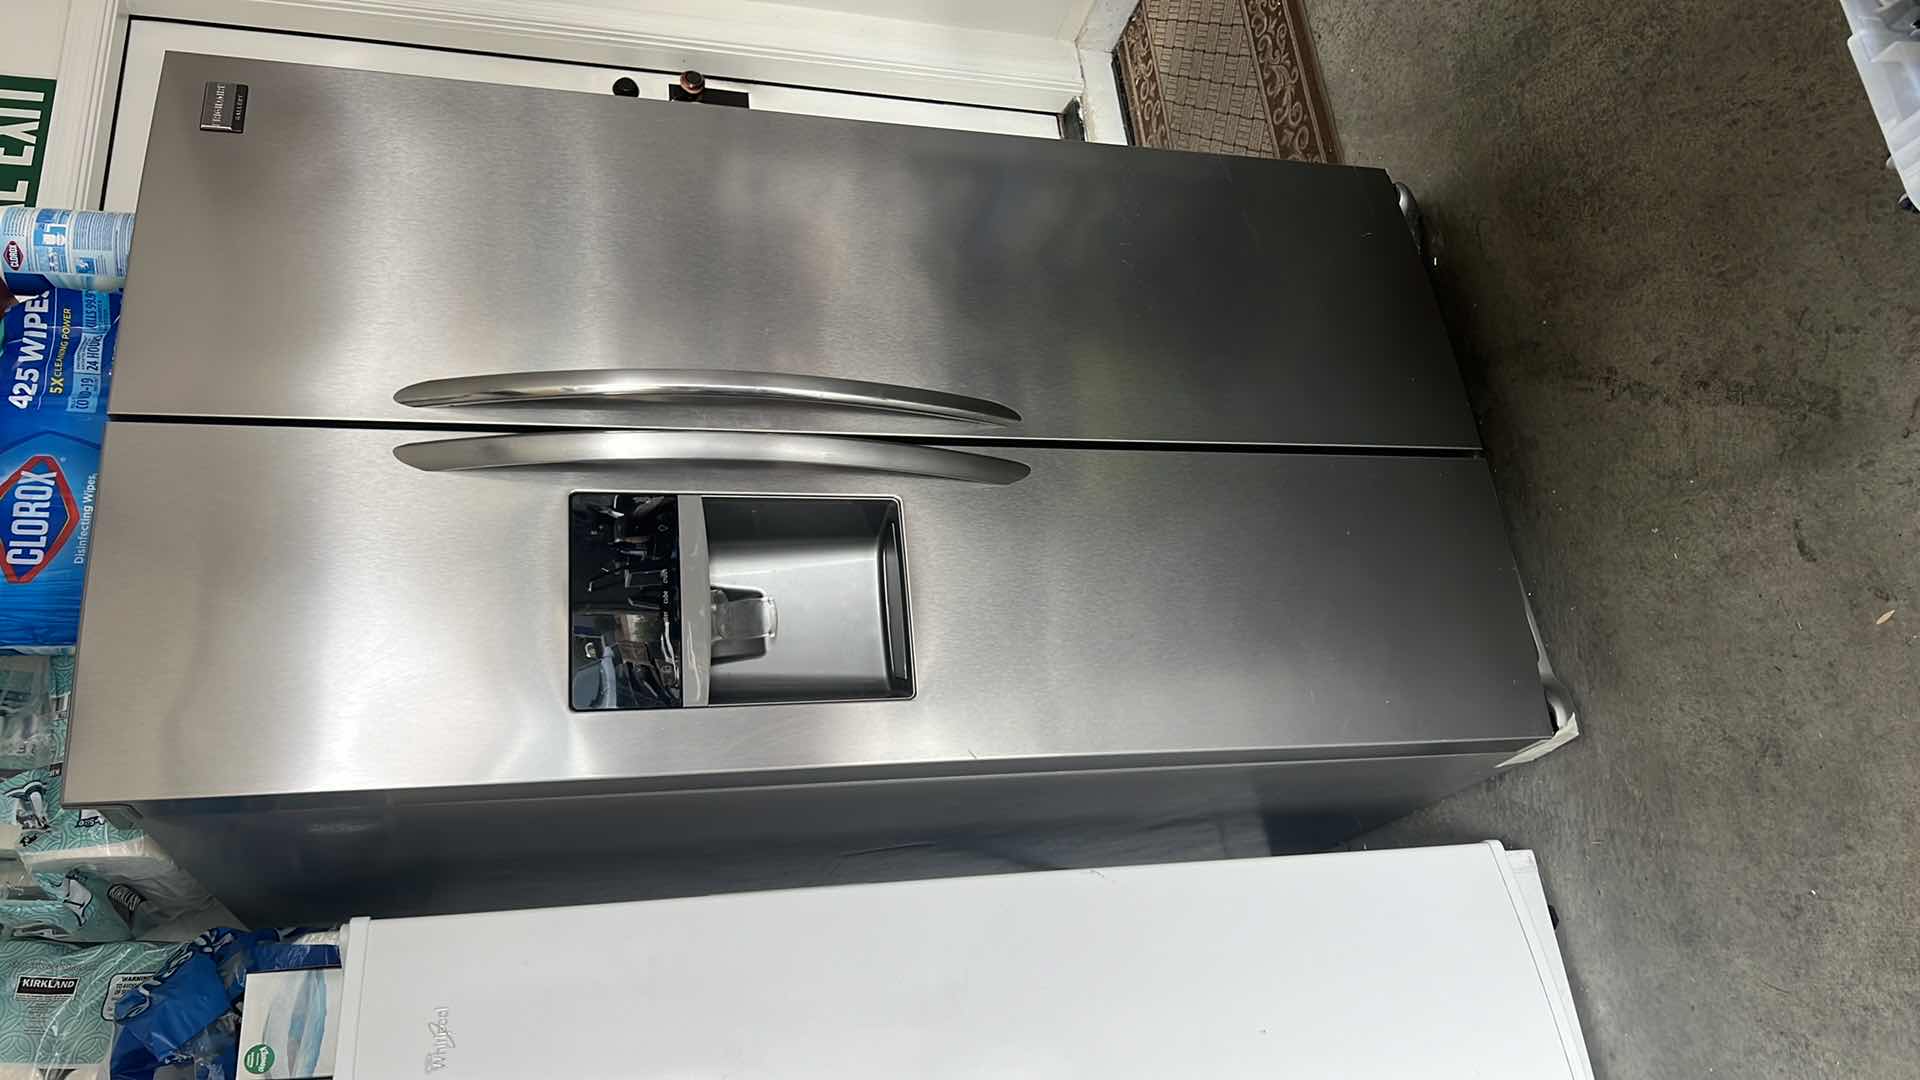 Photo 2 of FRIGIDAIRE STAINLESS STEEL SIDE BY SIDE REFRIGERATOR FREEZER (CONTENTS NOT INCLUDED)